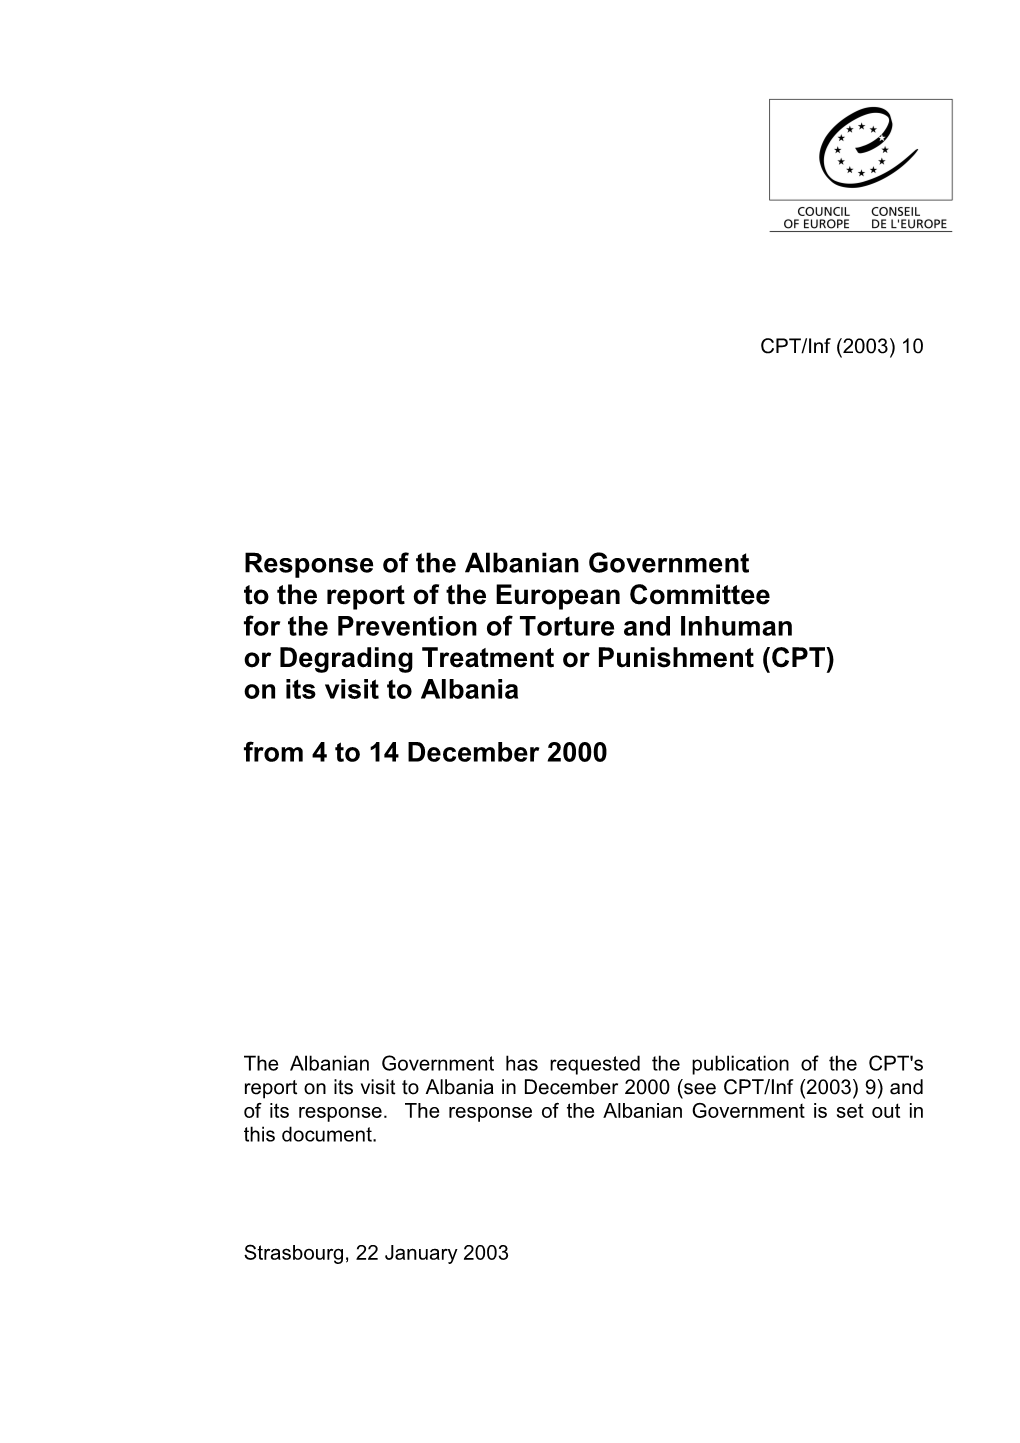 Response of the Albanian Government to the Report